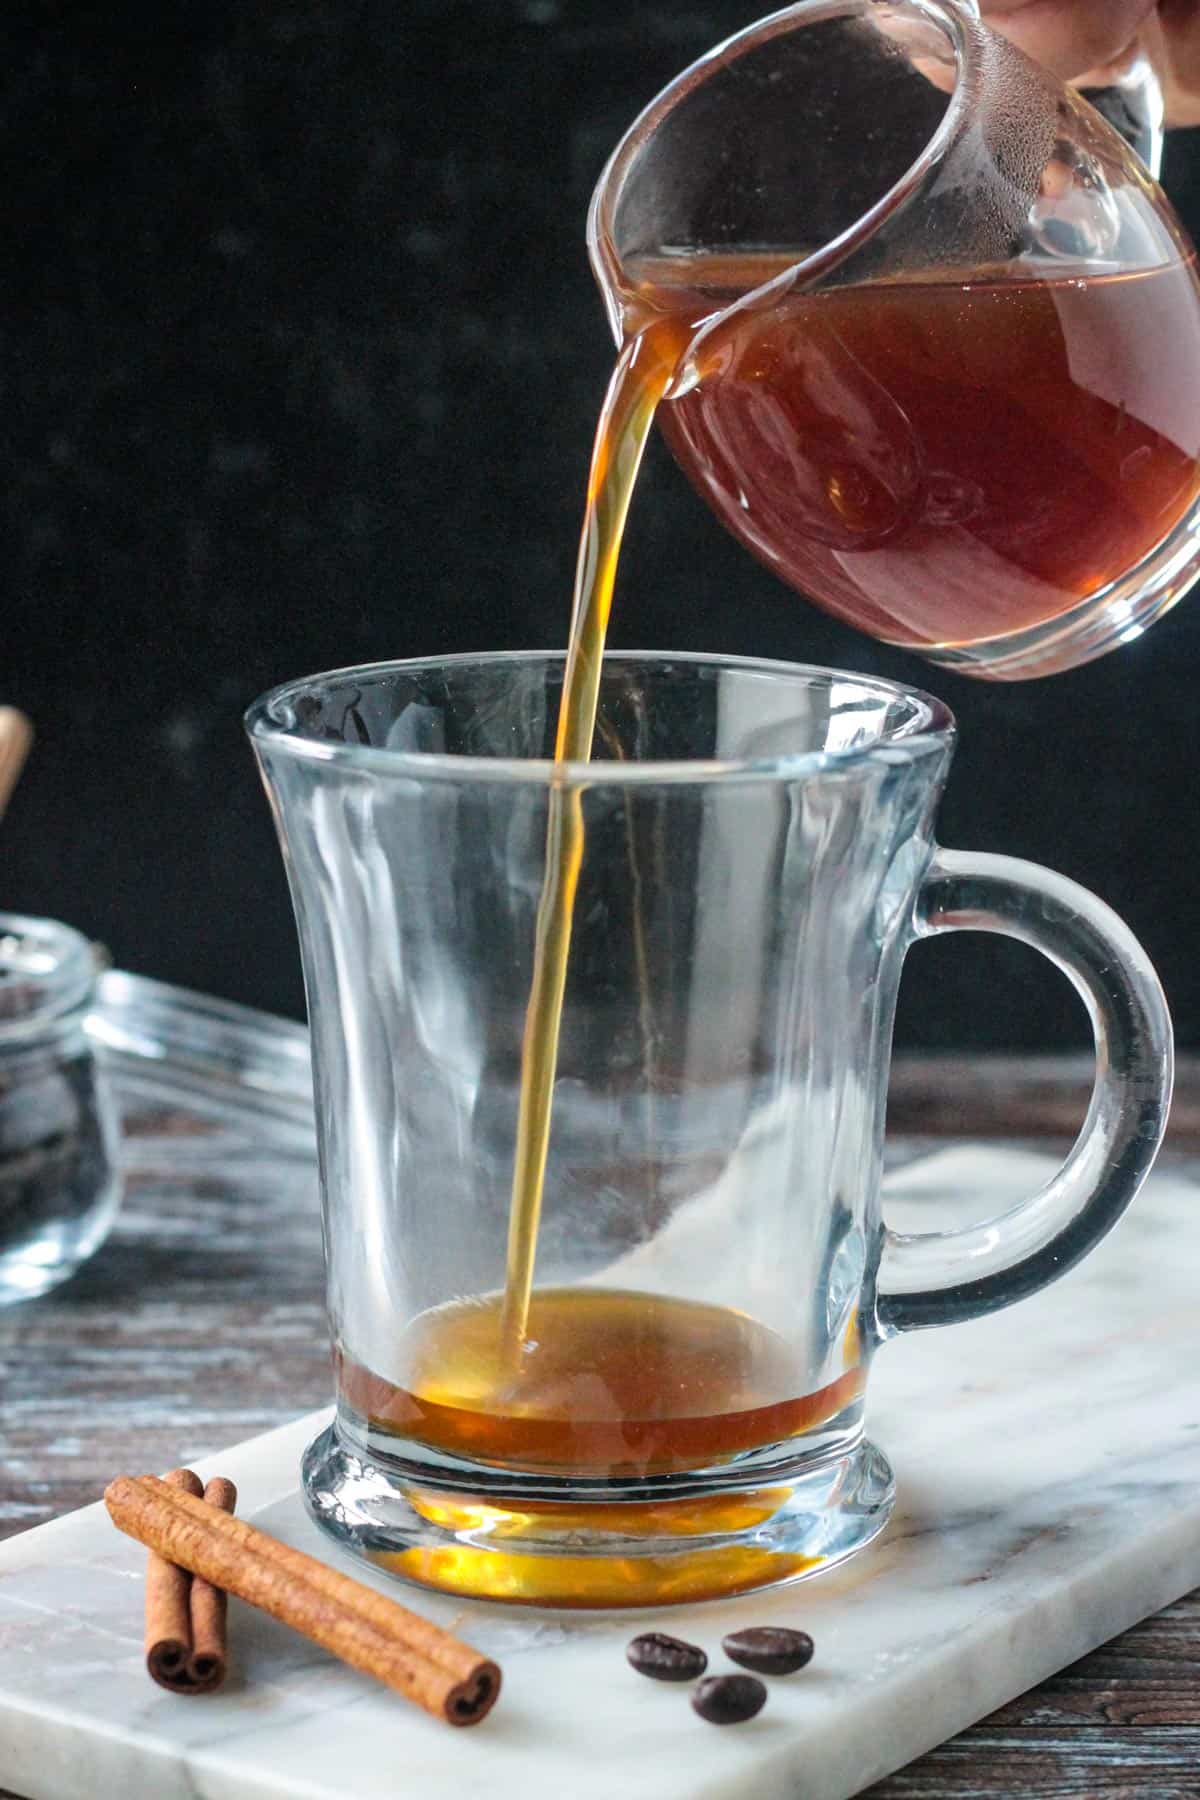 Pouring apple brown sugar syrup into a glass.